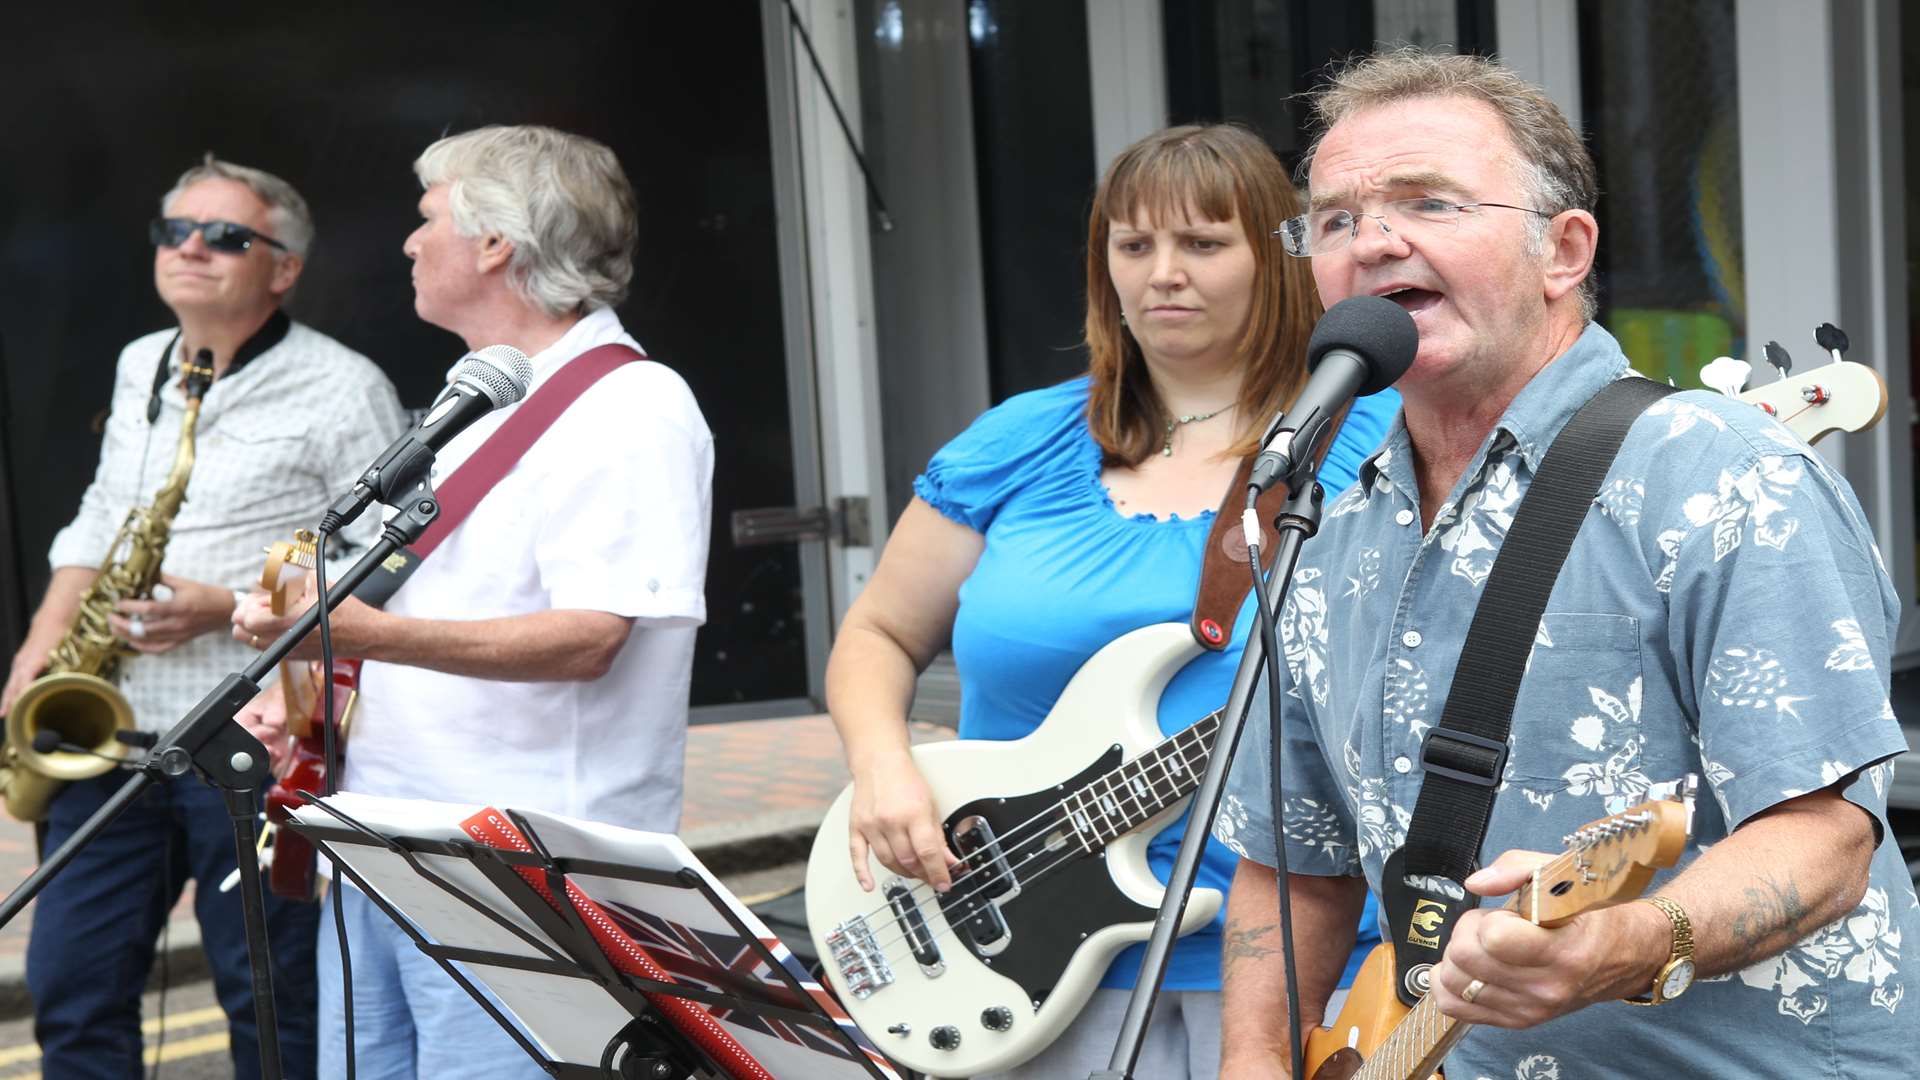 The Key Street Band play at last year's Sittingbourne Carnival